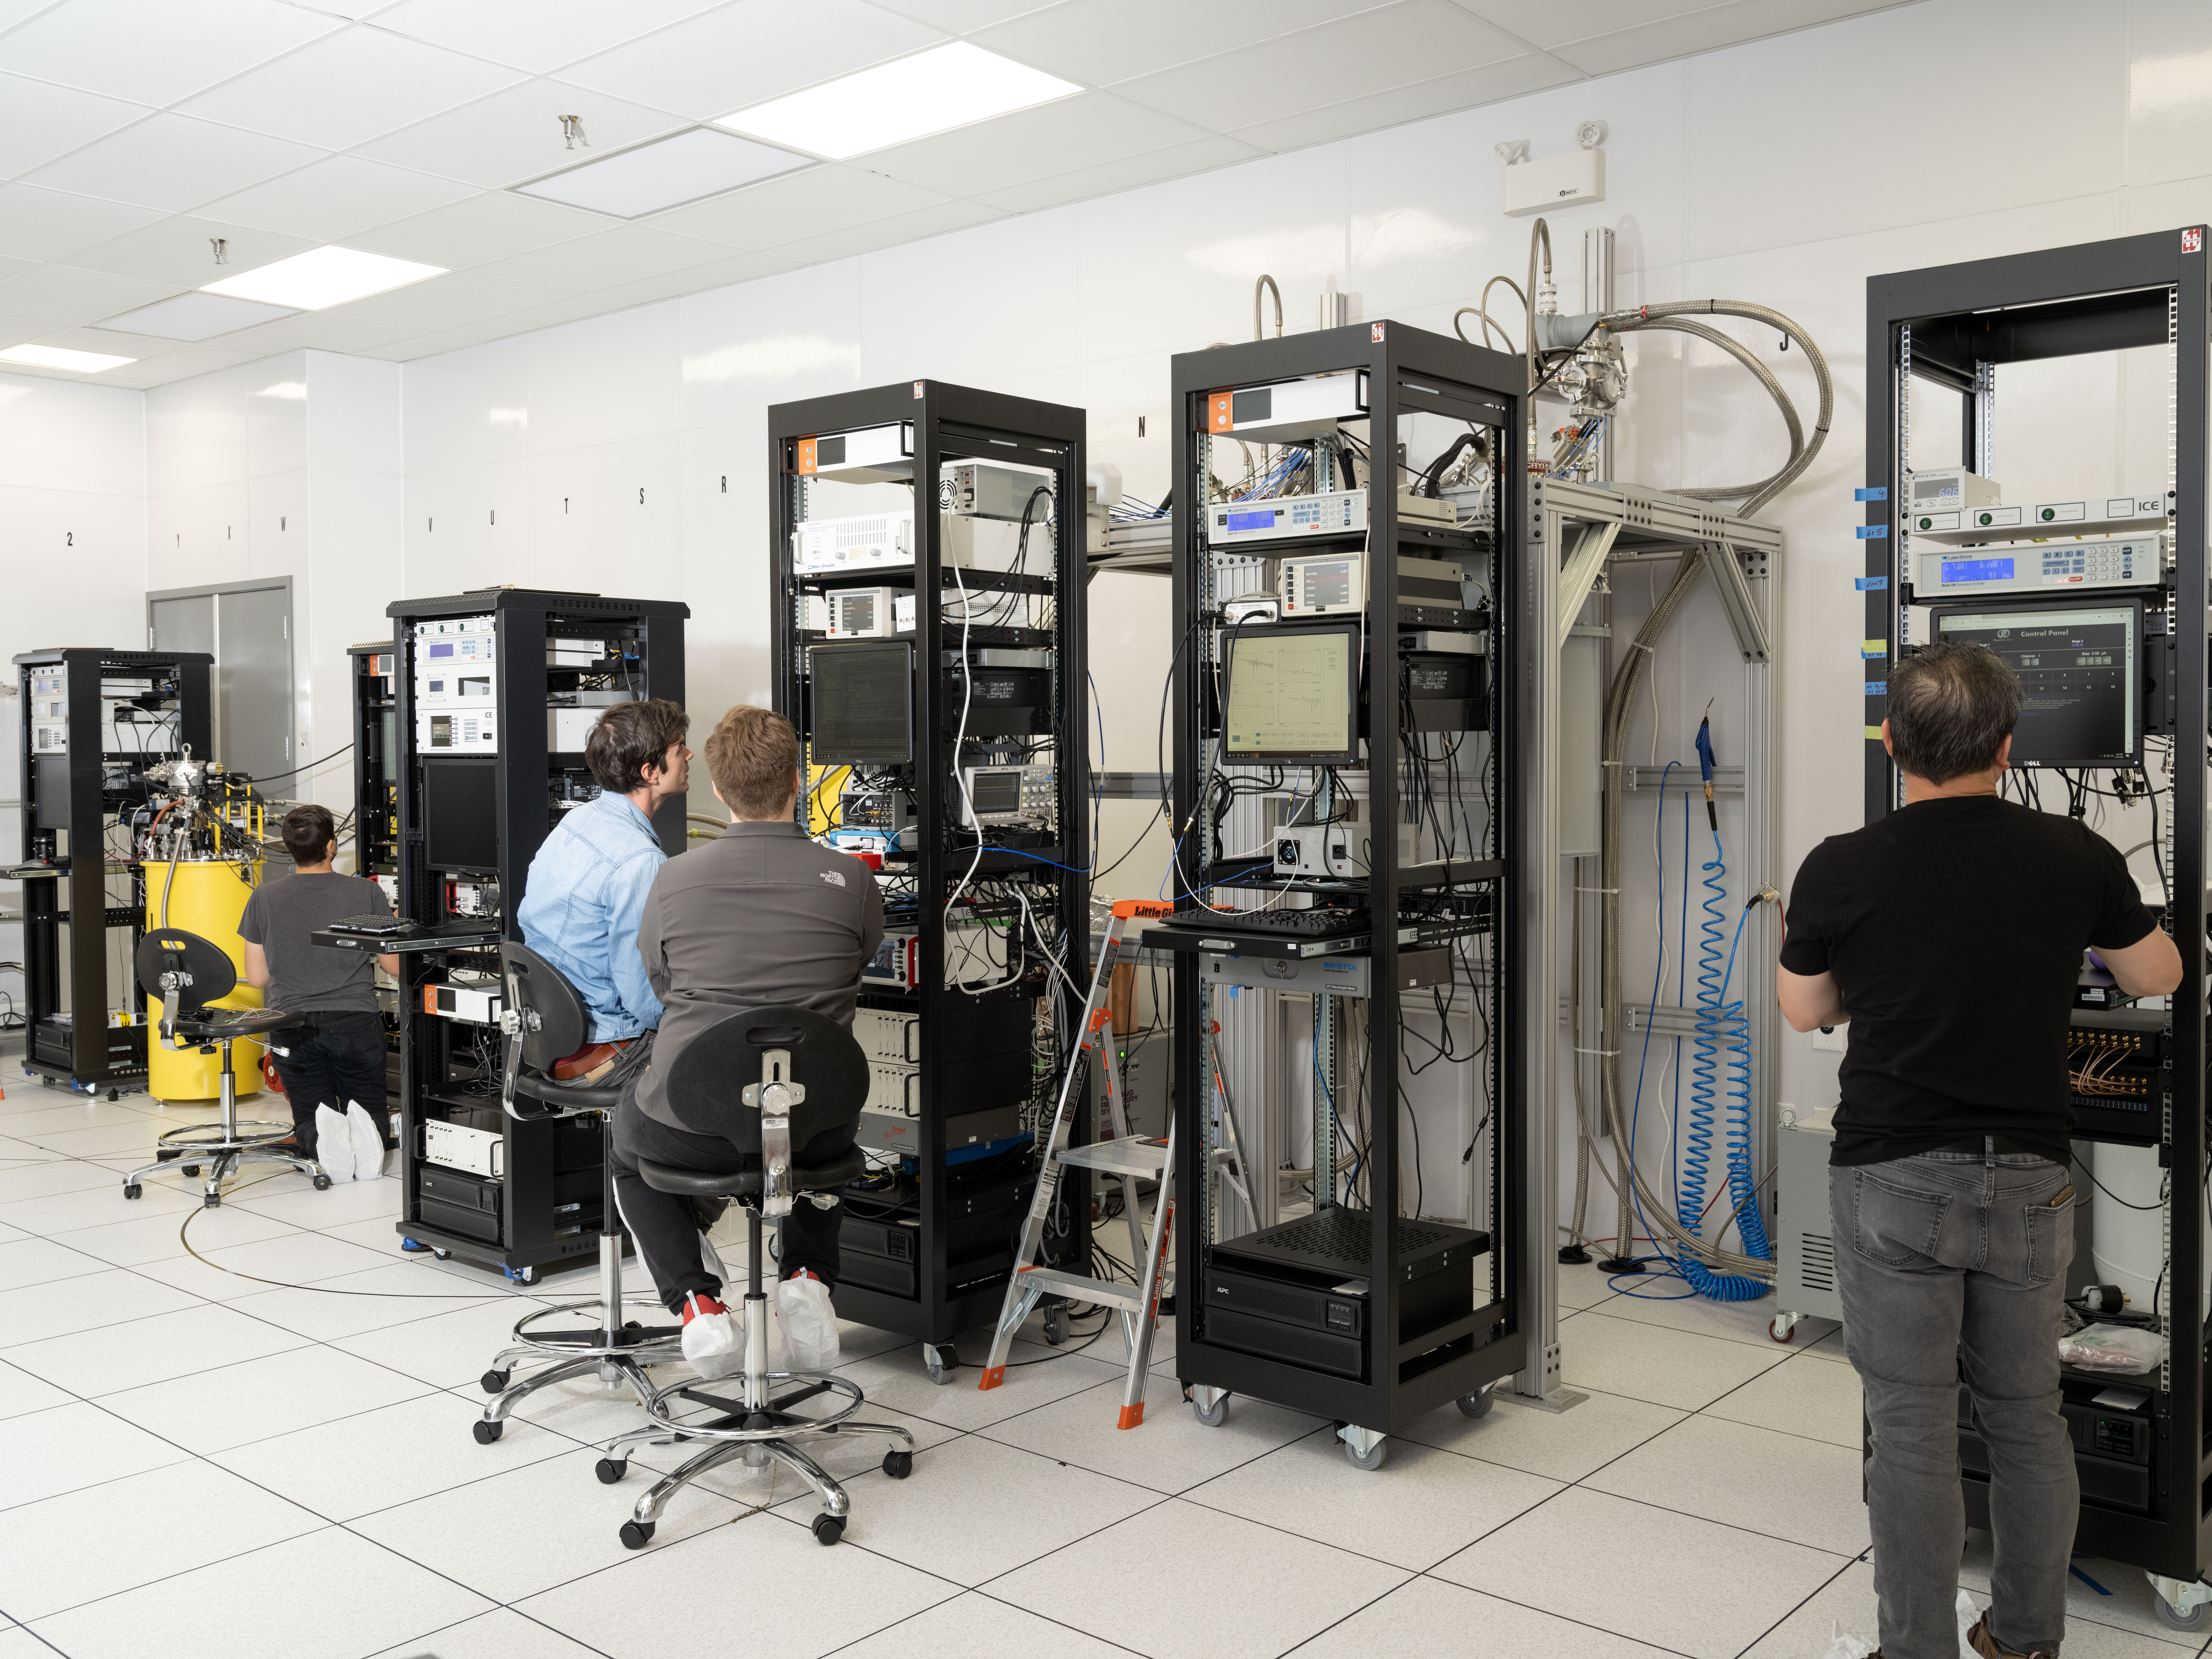 People working in the lab at Photonic